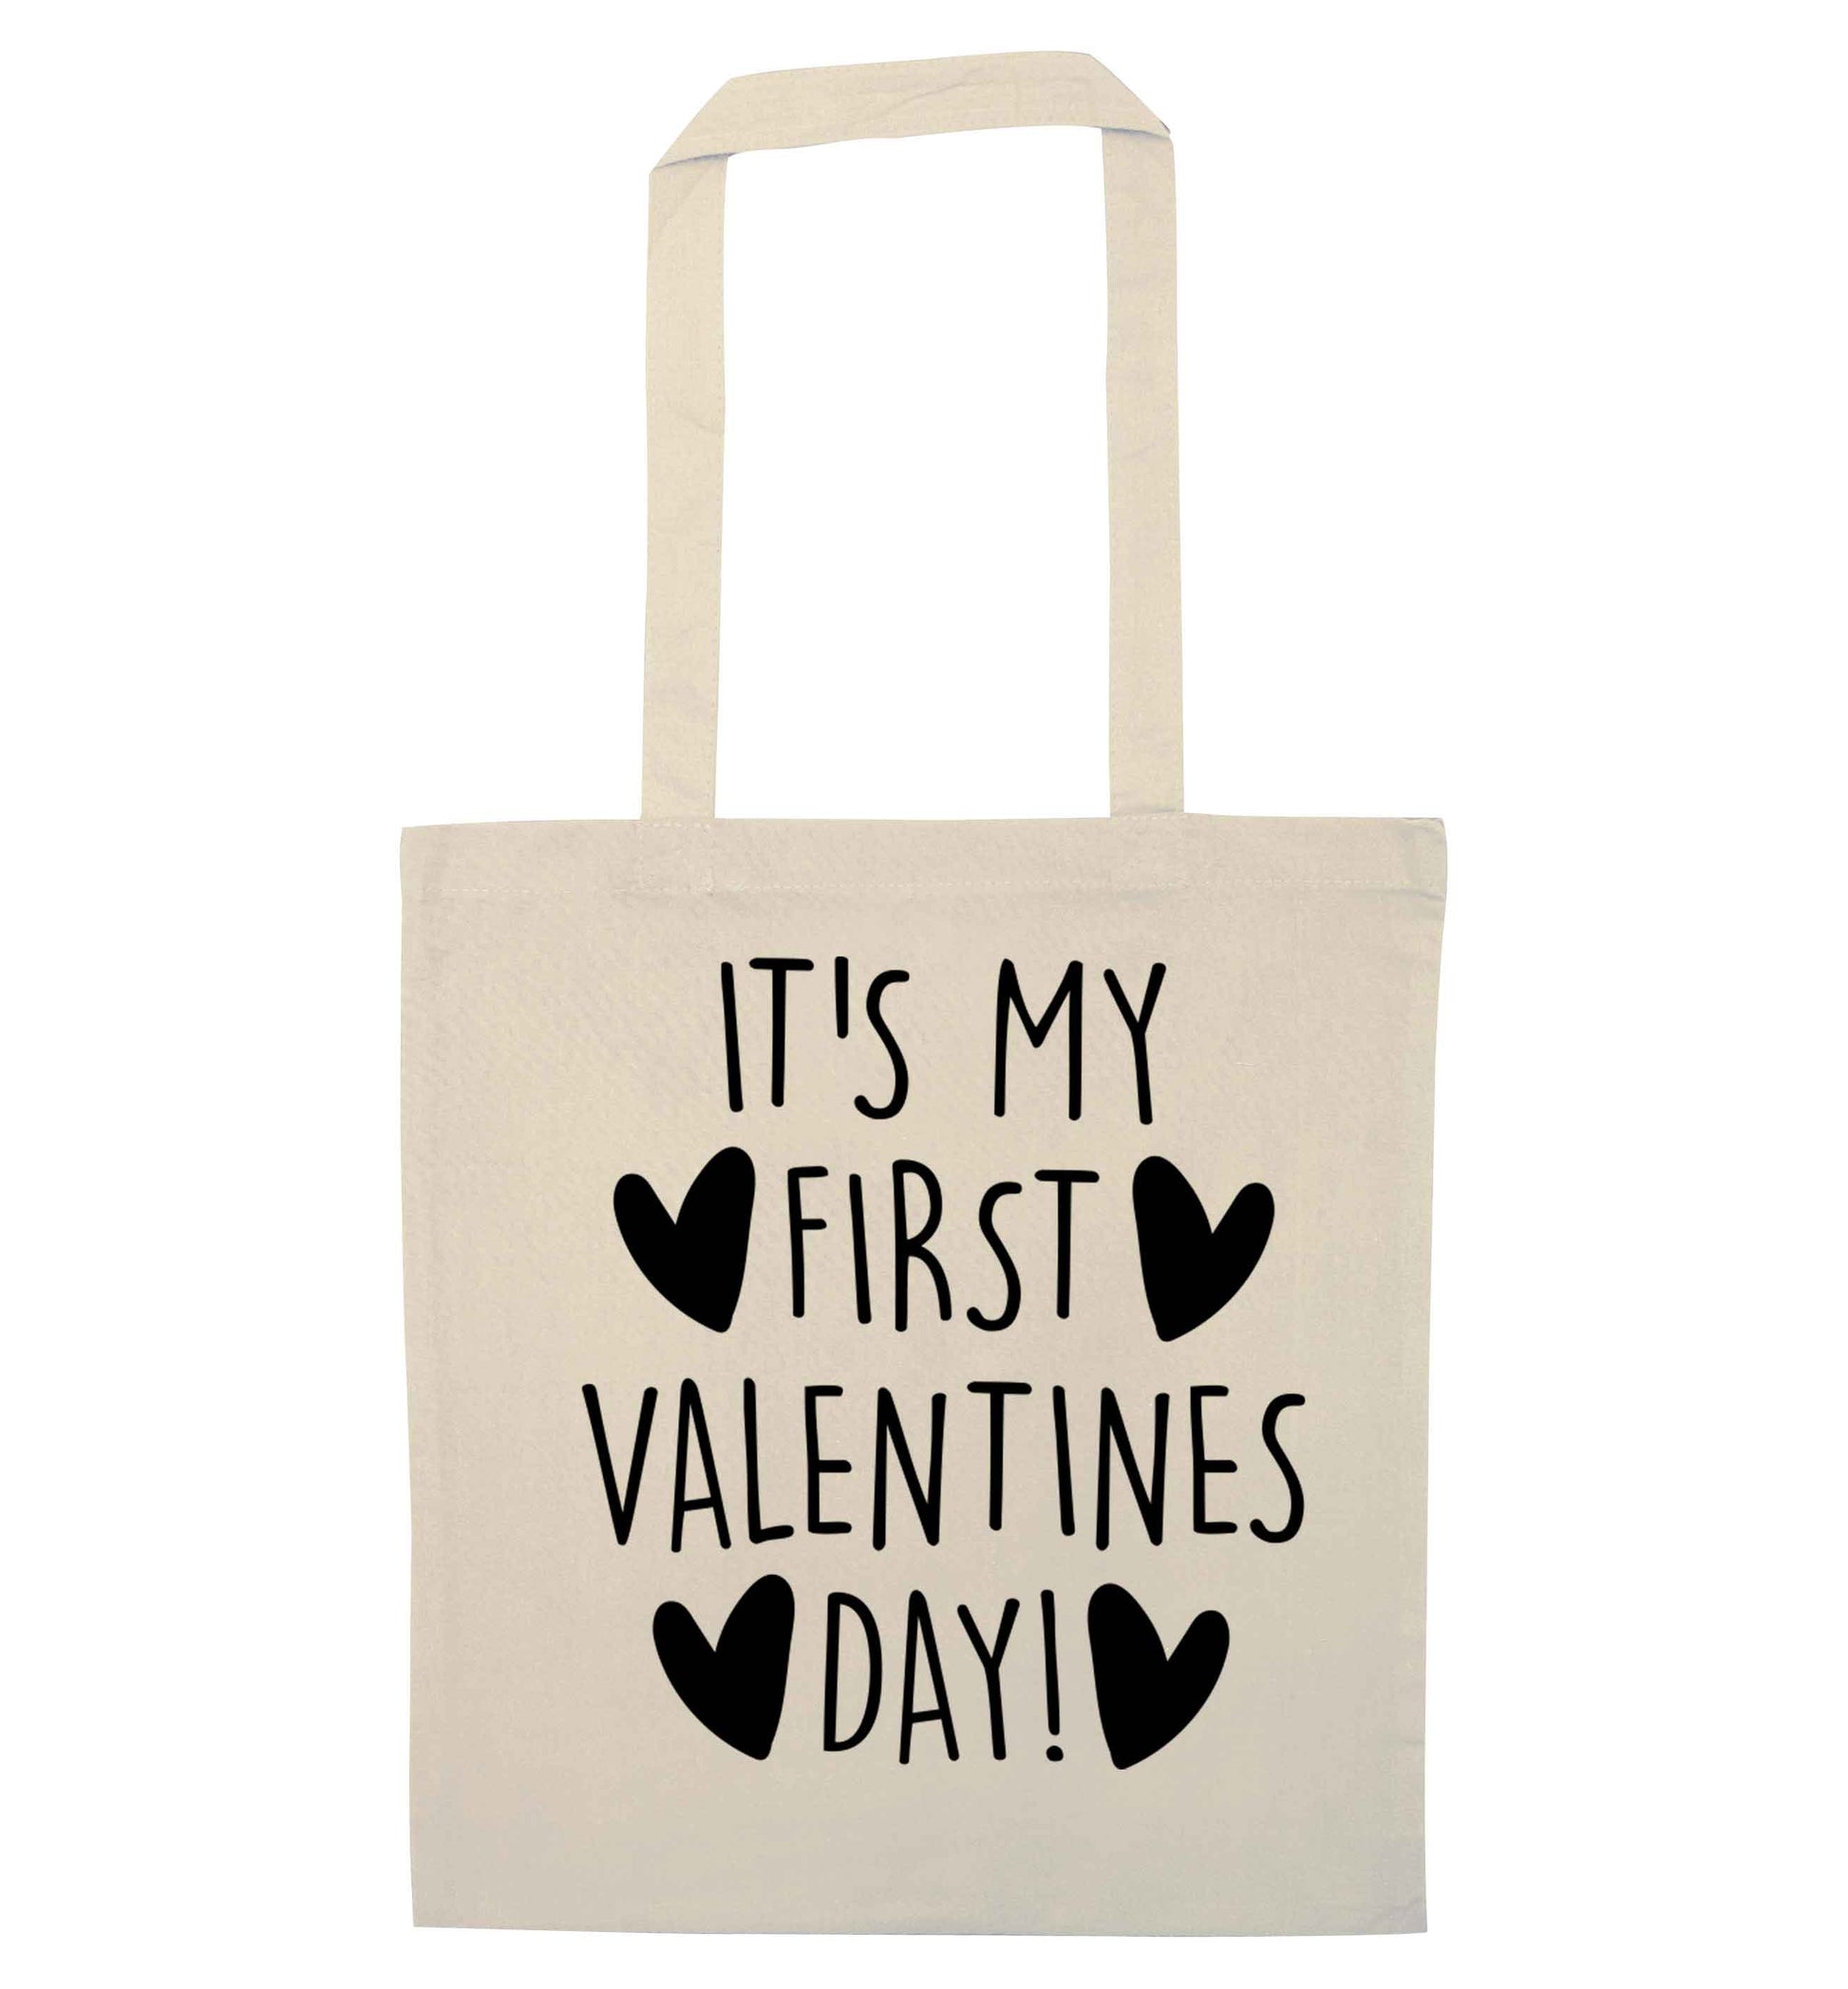 It's my first valentines day! natural tote bag